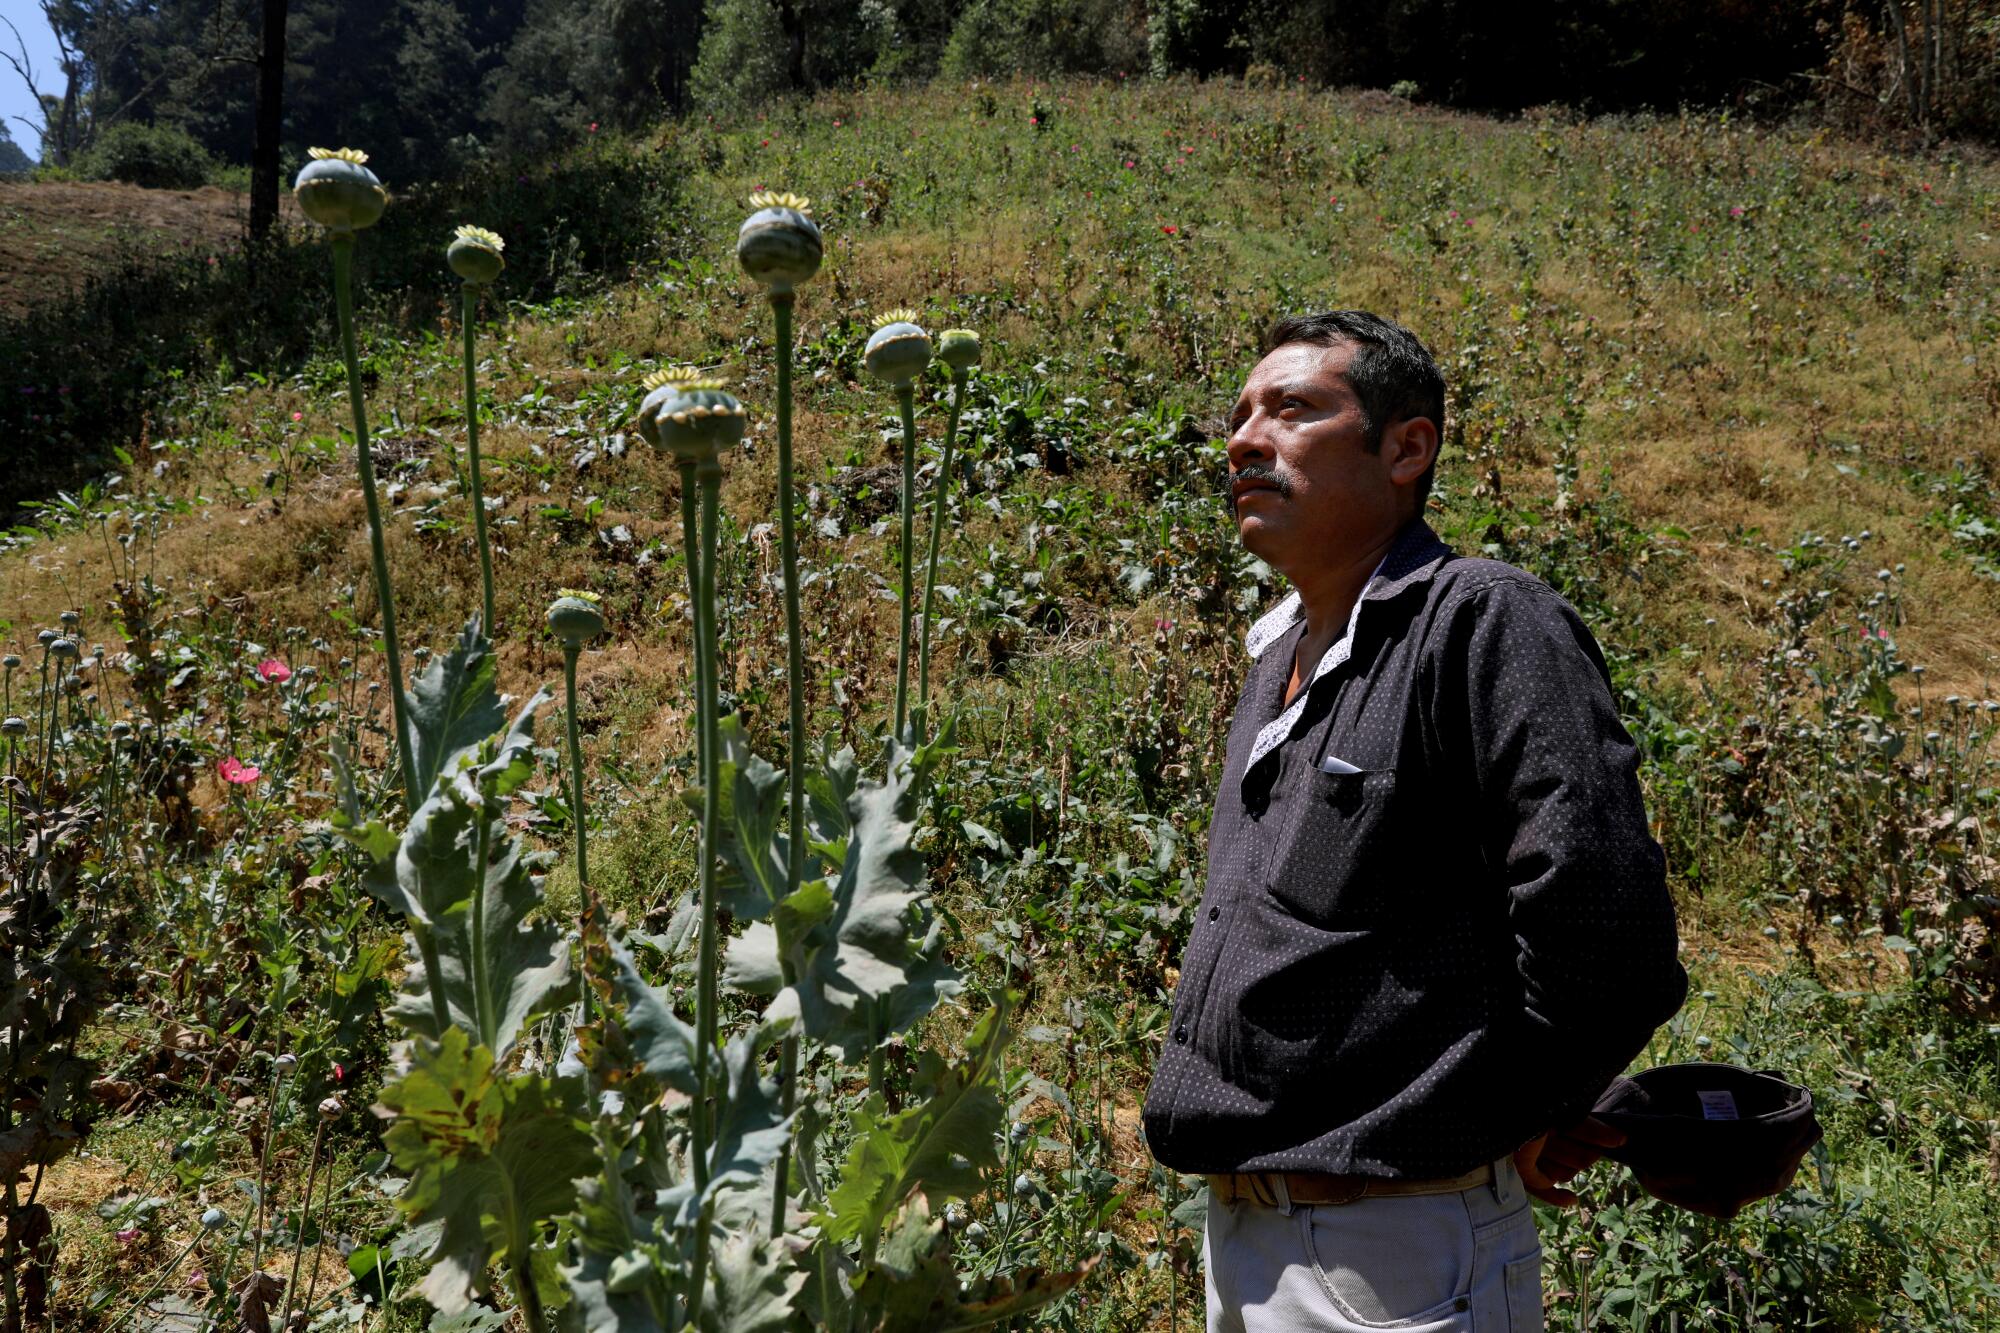 Poppy farmer Ruperto Pacheco Vega stands next to some of the pods, to be collected and later sold to make heroin, at his field in Filo de Caballos, Guerrero state.